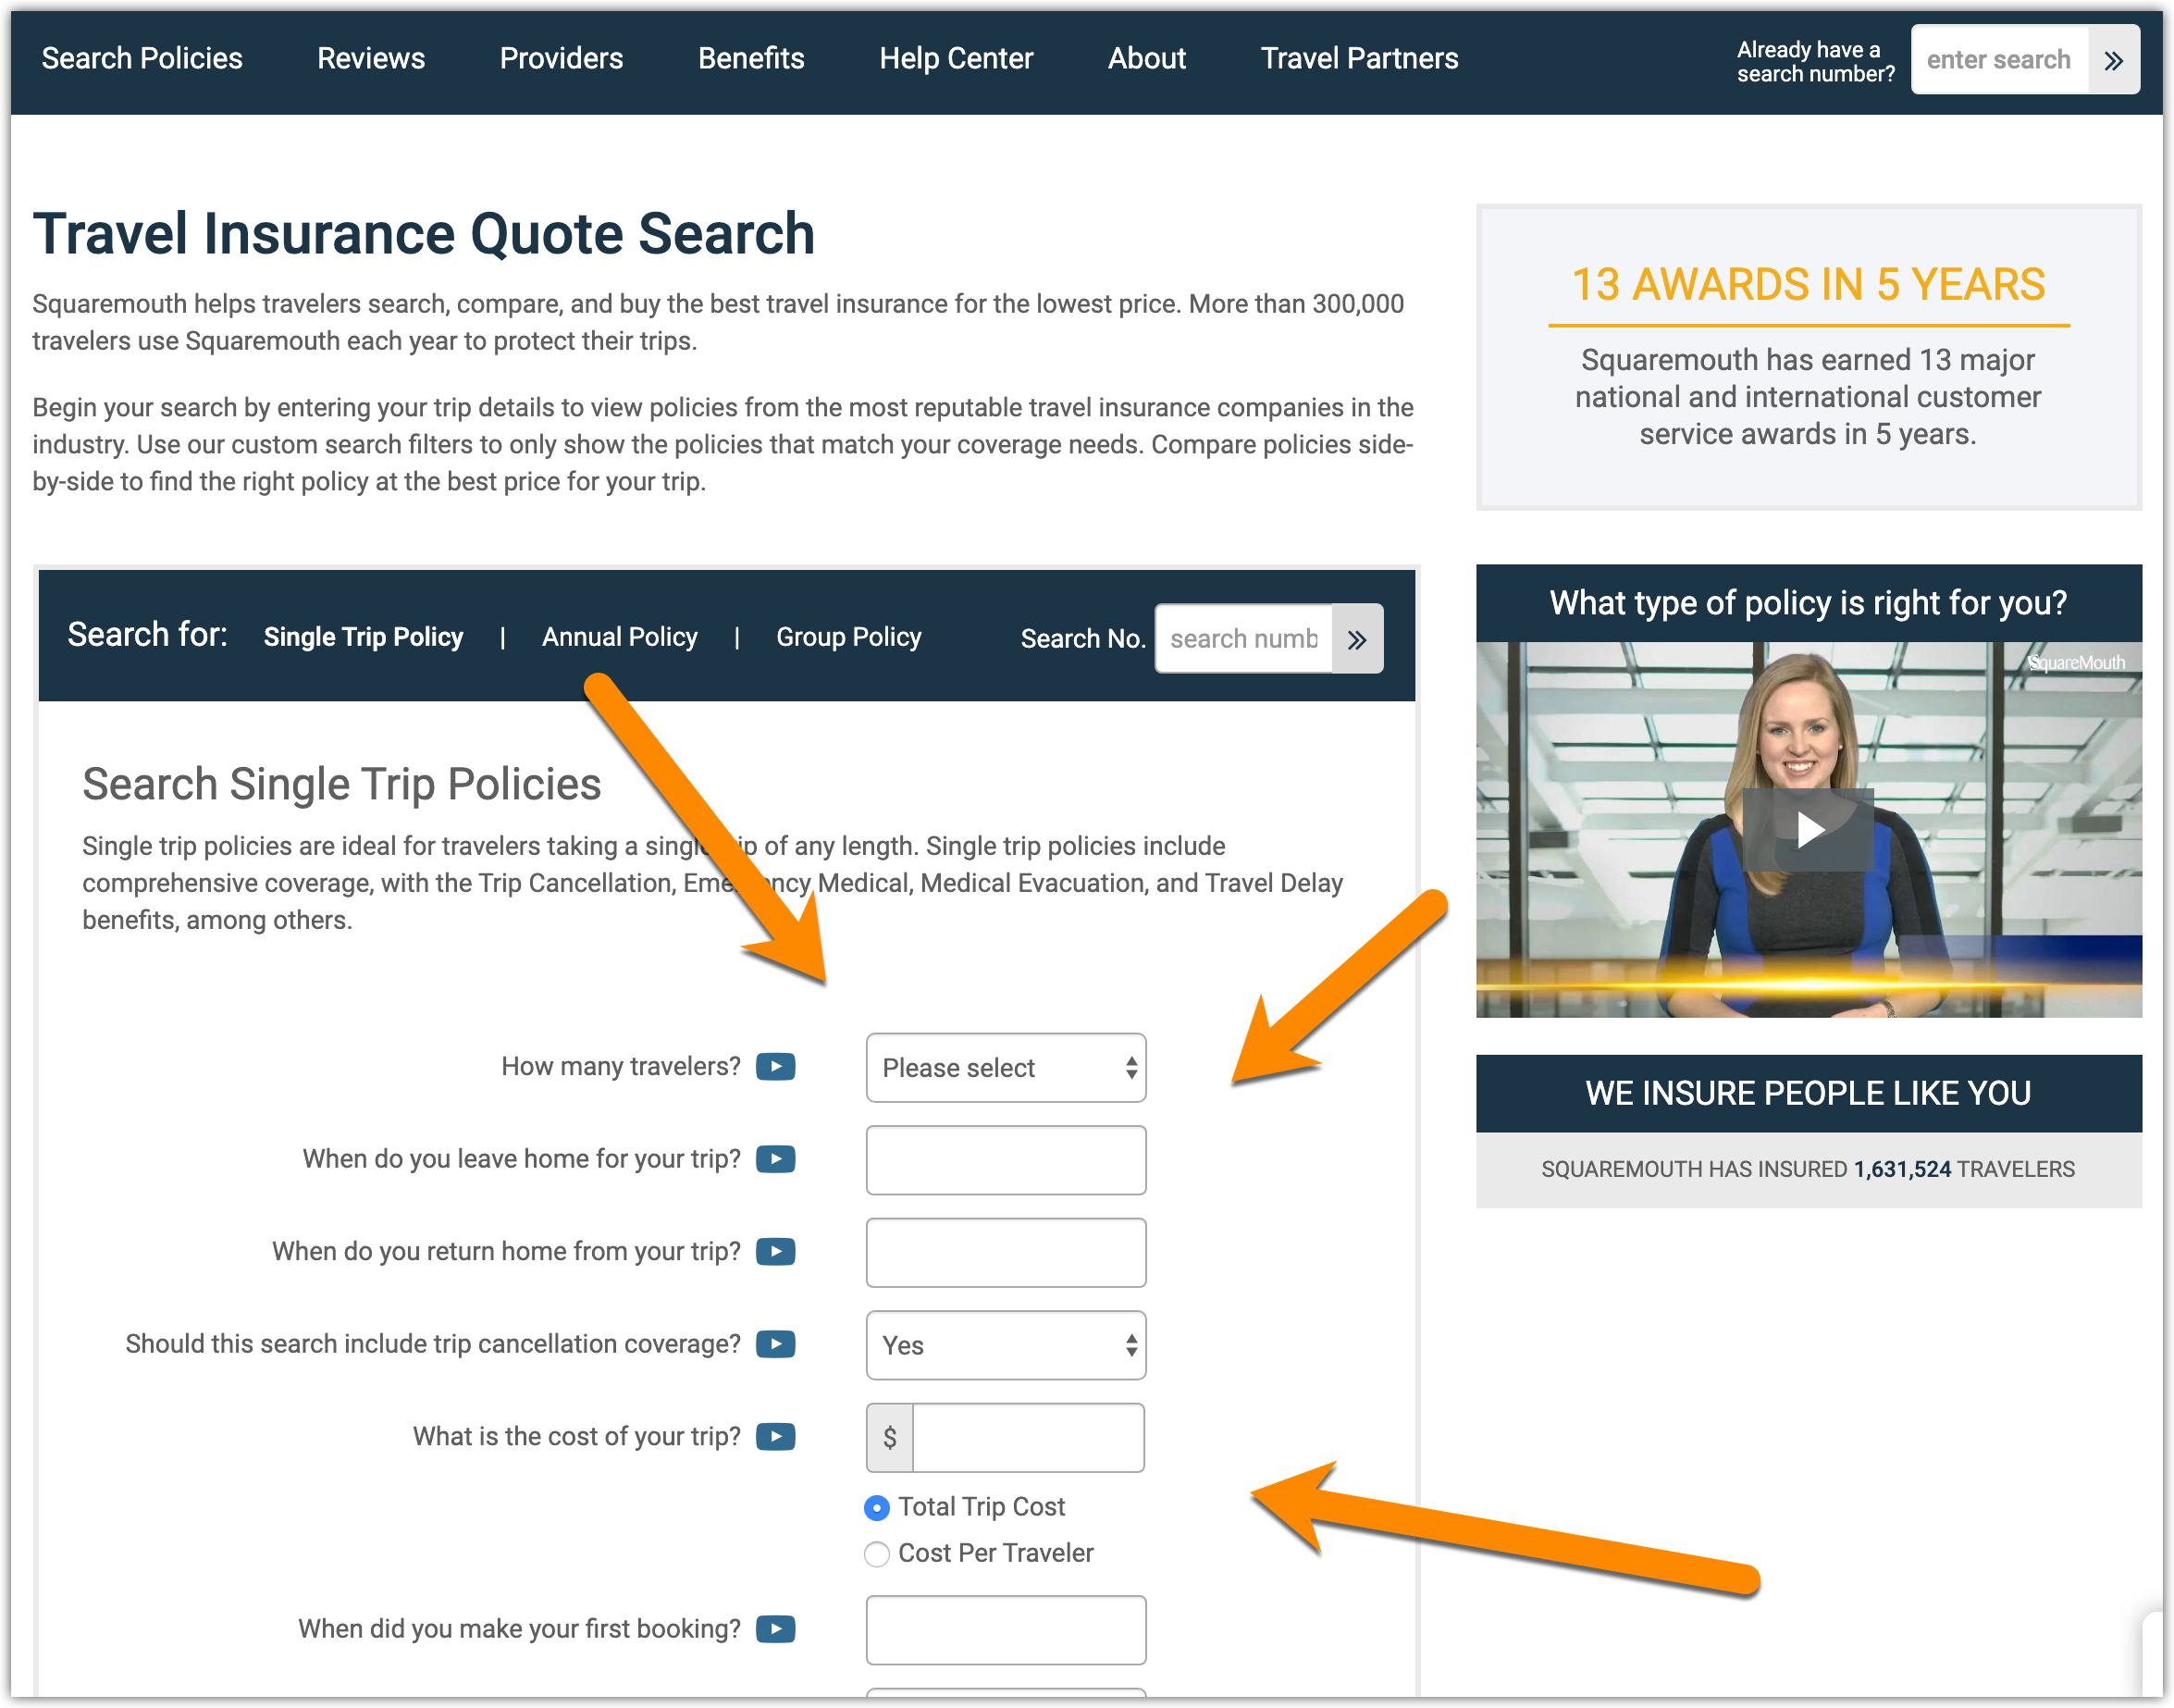 Enter your trip information on this screen to start your travel insurance search.